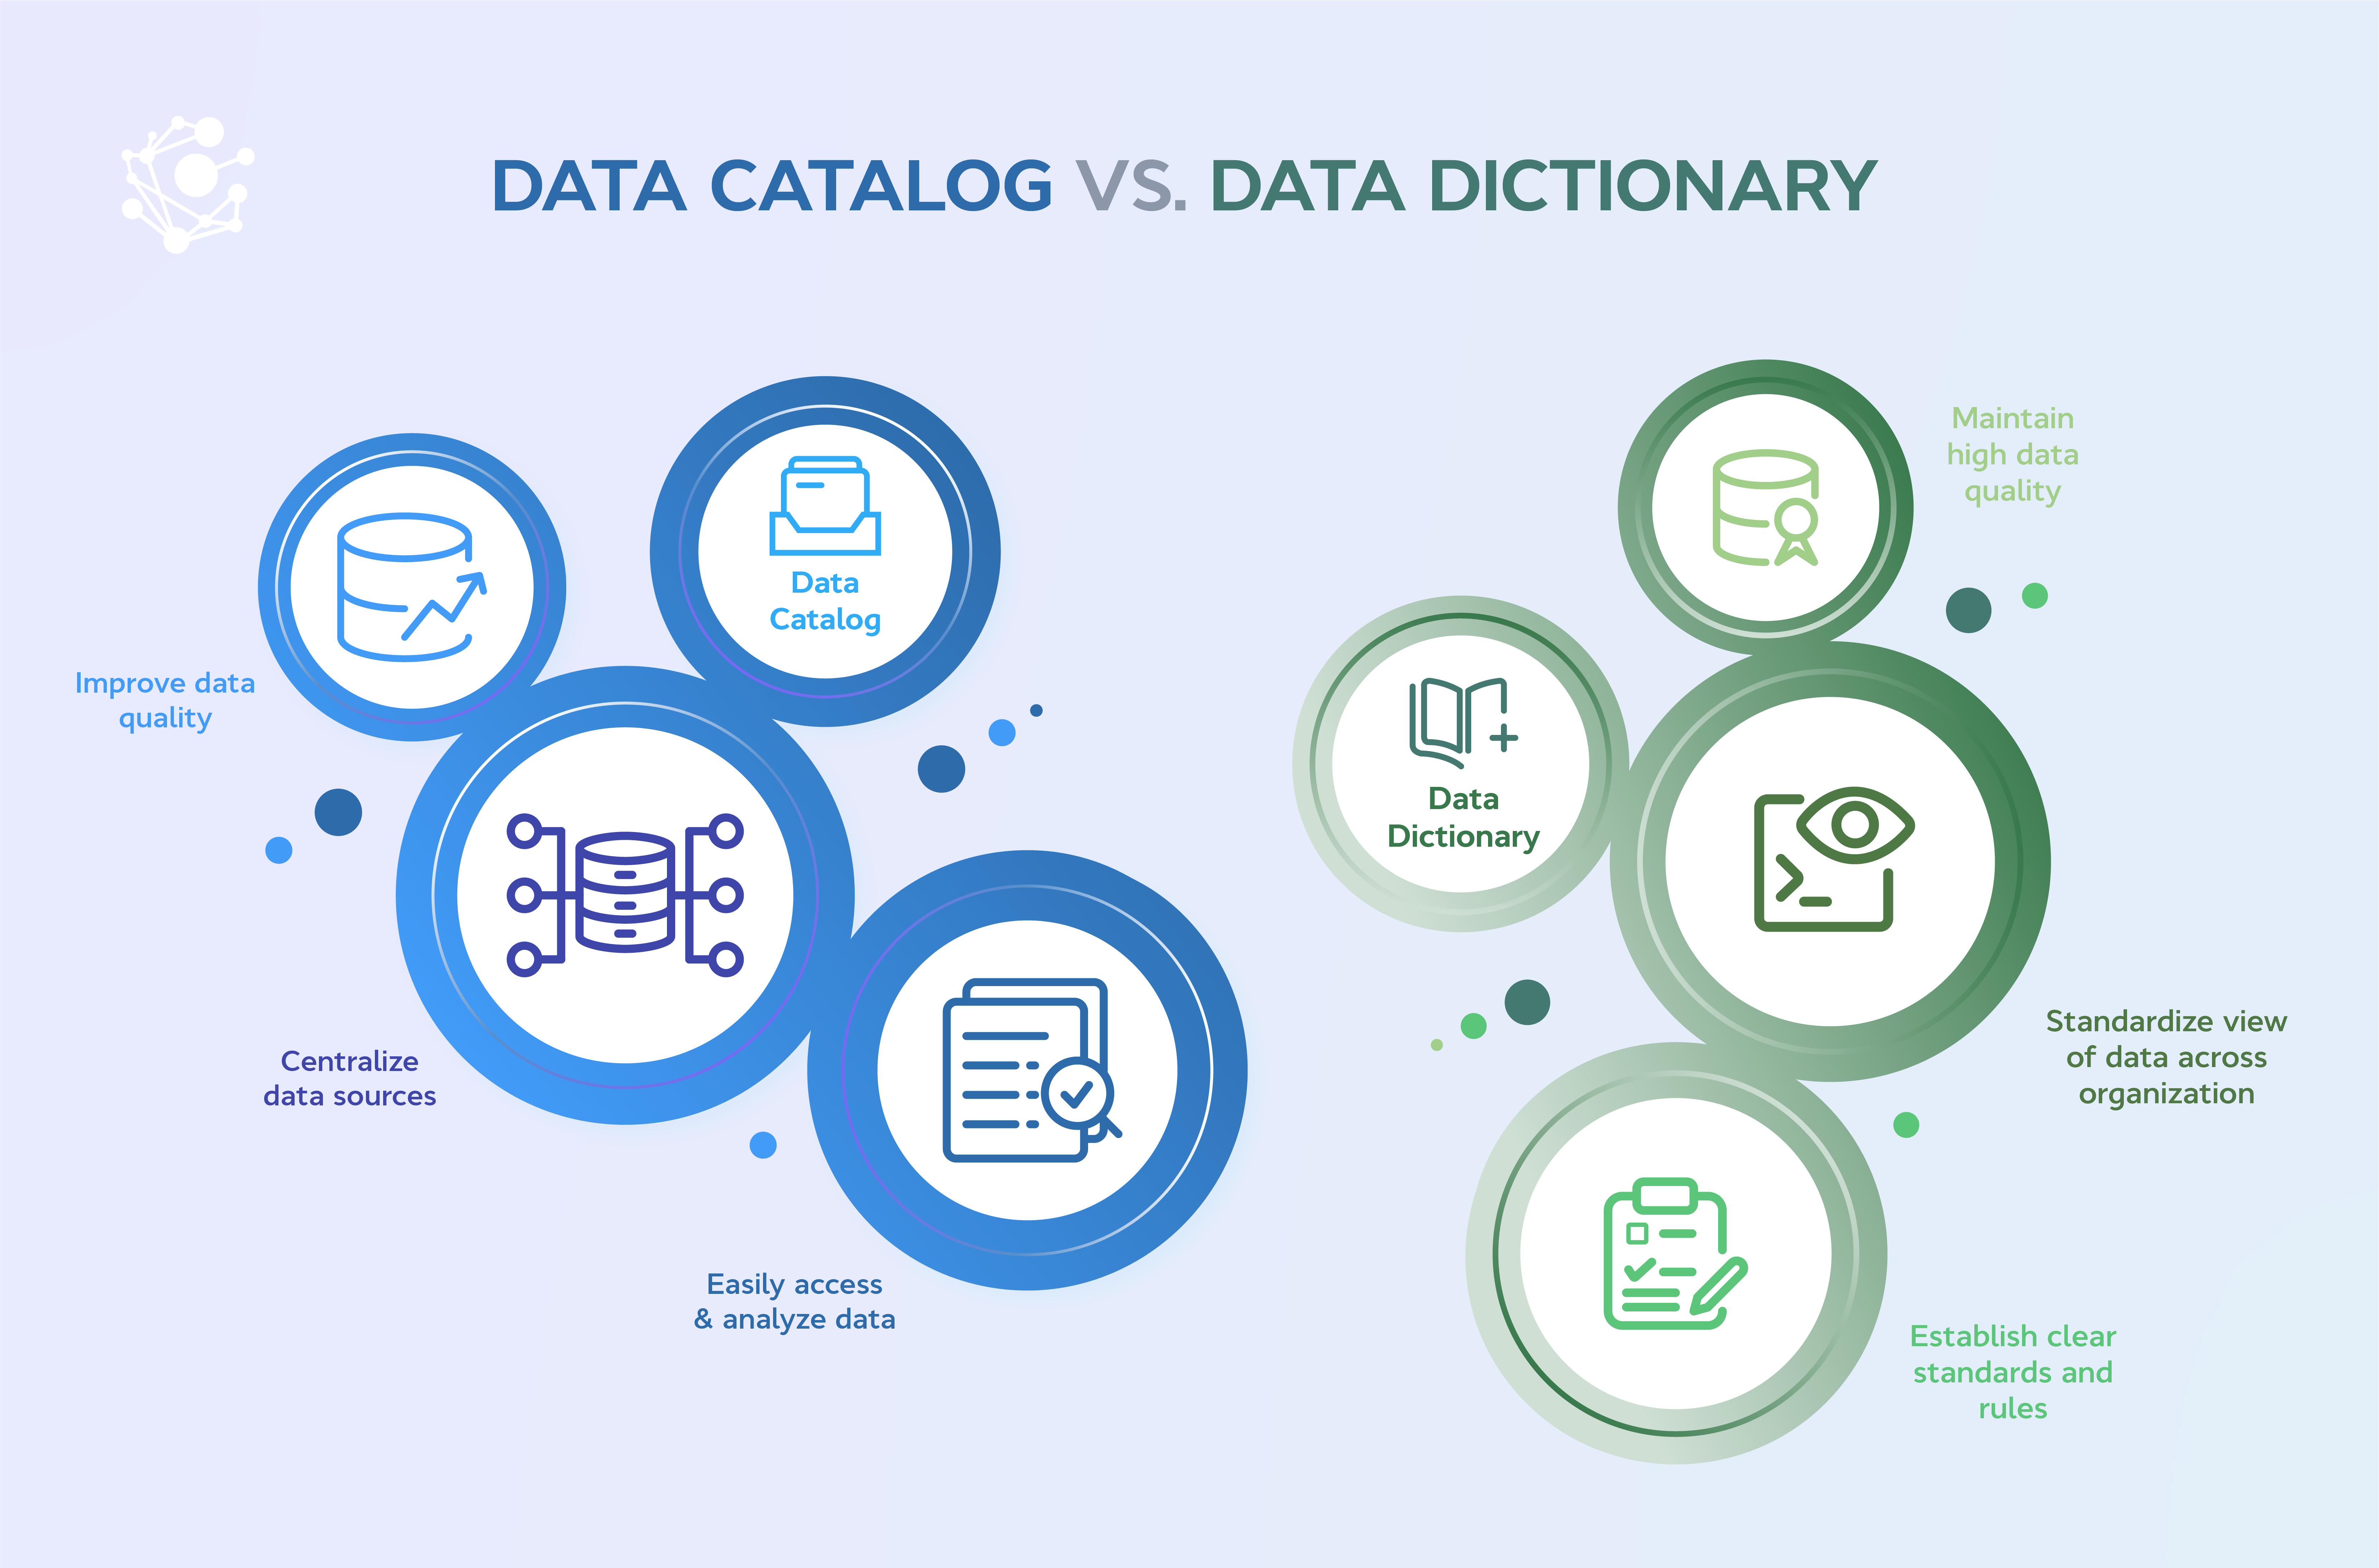 Data Catalog vs Data Dictionary - Differences & Use Cases